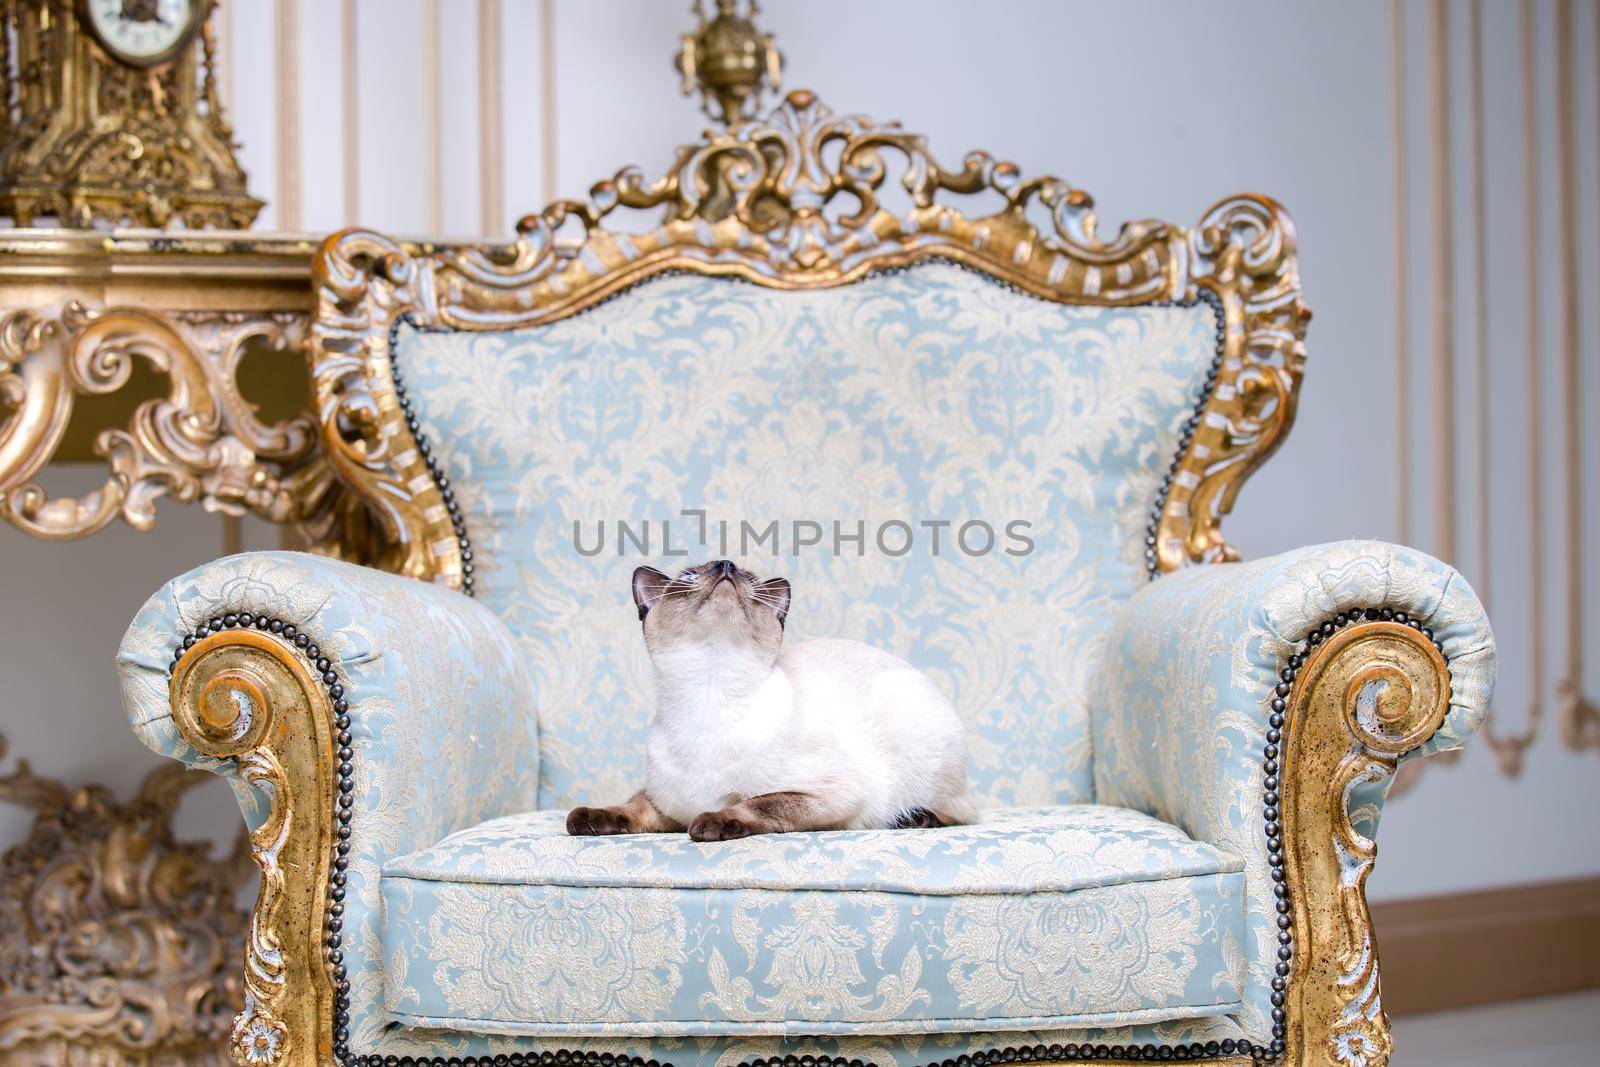 Beautiful rare breed of cat Mekongsky Bobtail female pet cat without tail sits interior of European architecture on retro vintage chic royal armchair 18th century Versailles palace. Baroque furniture.